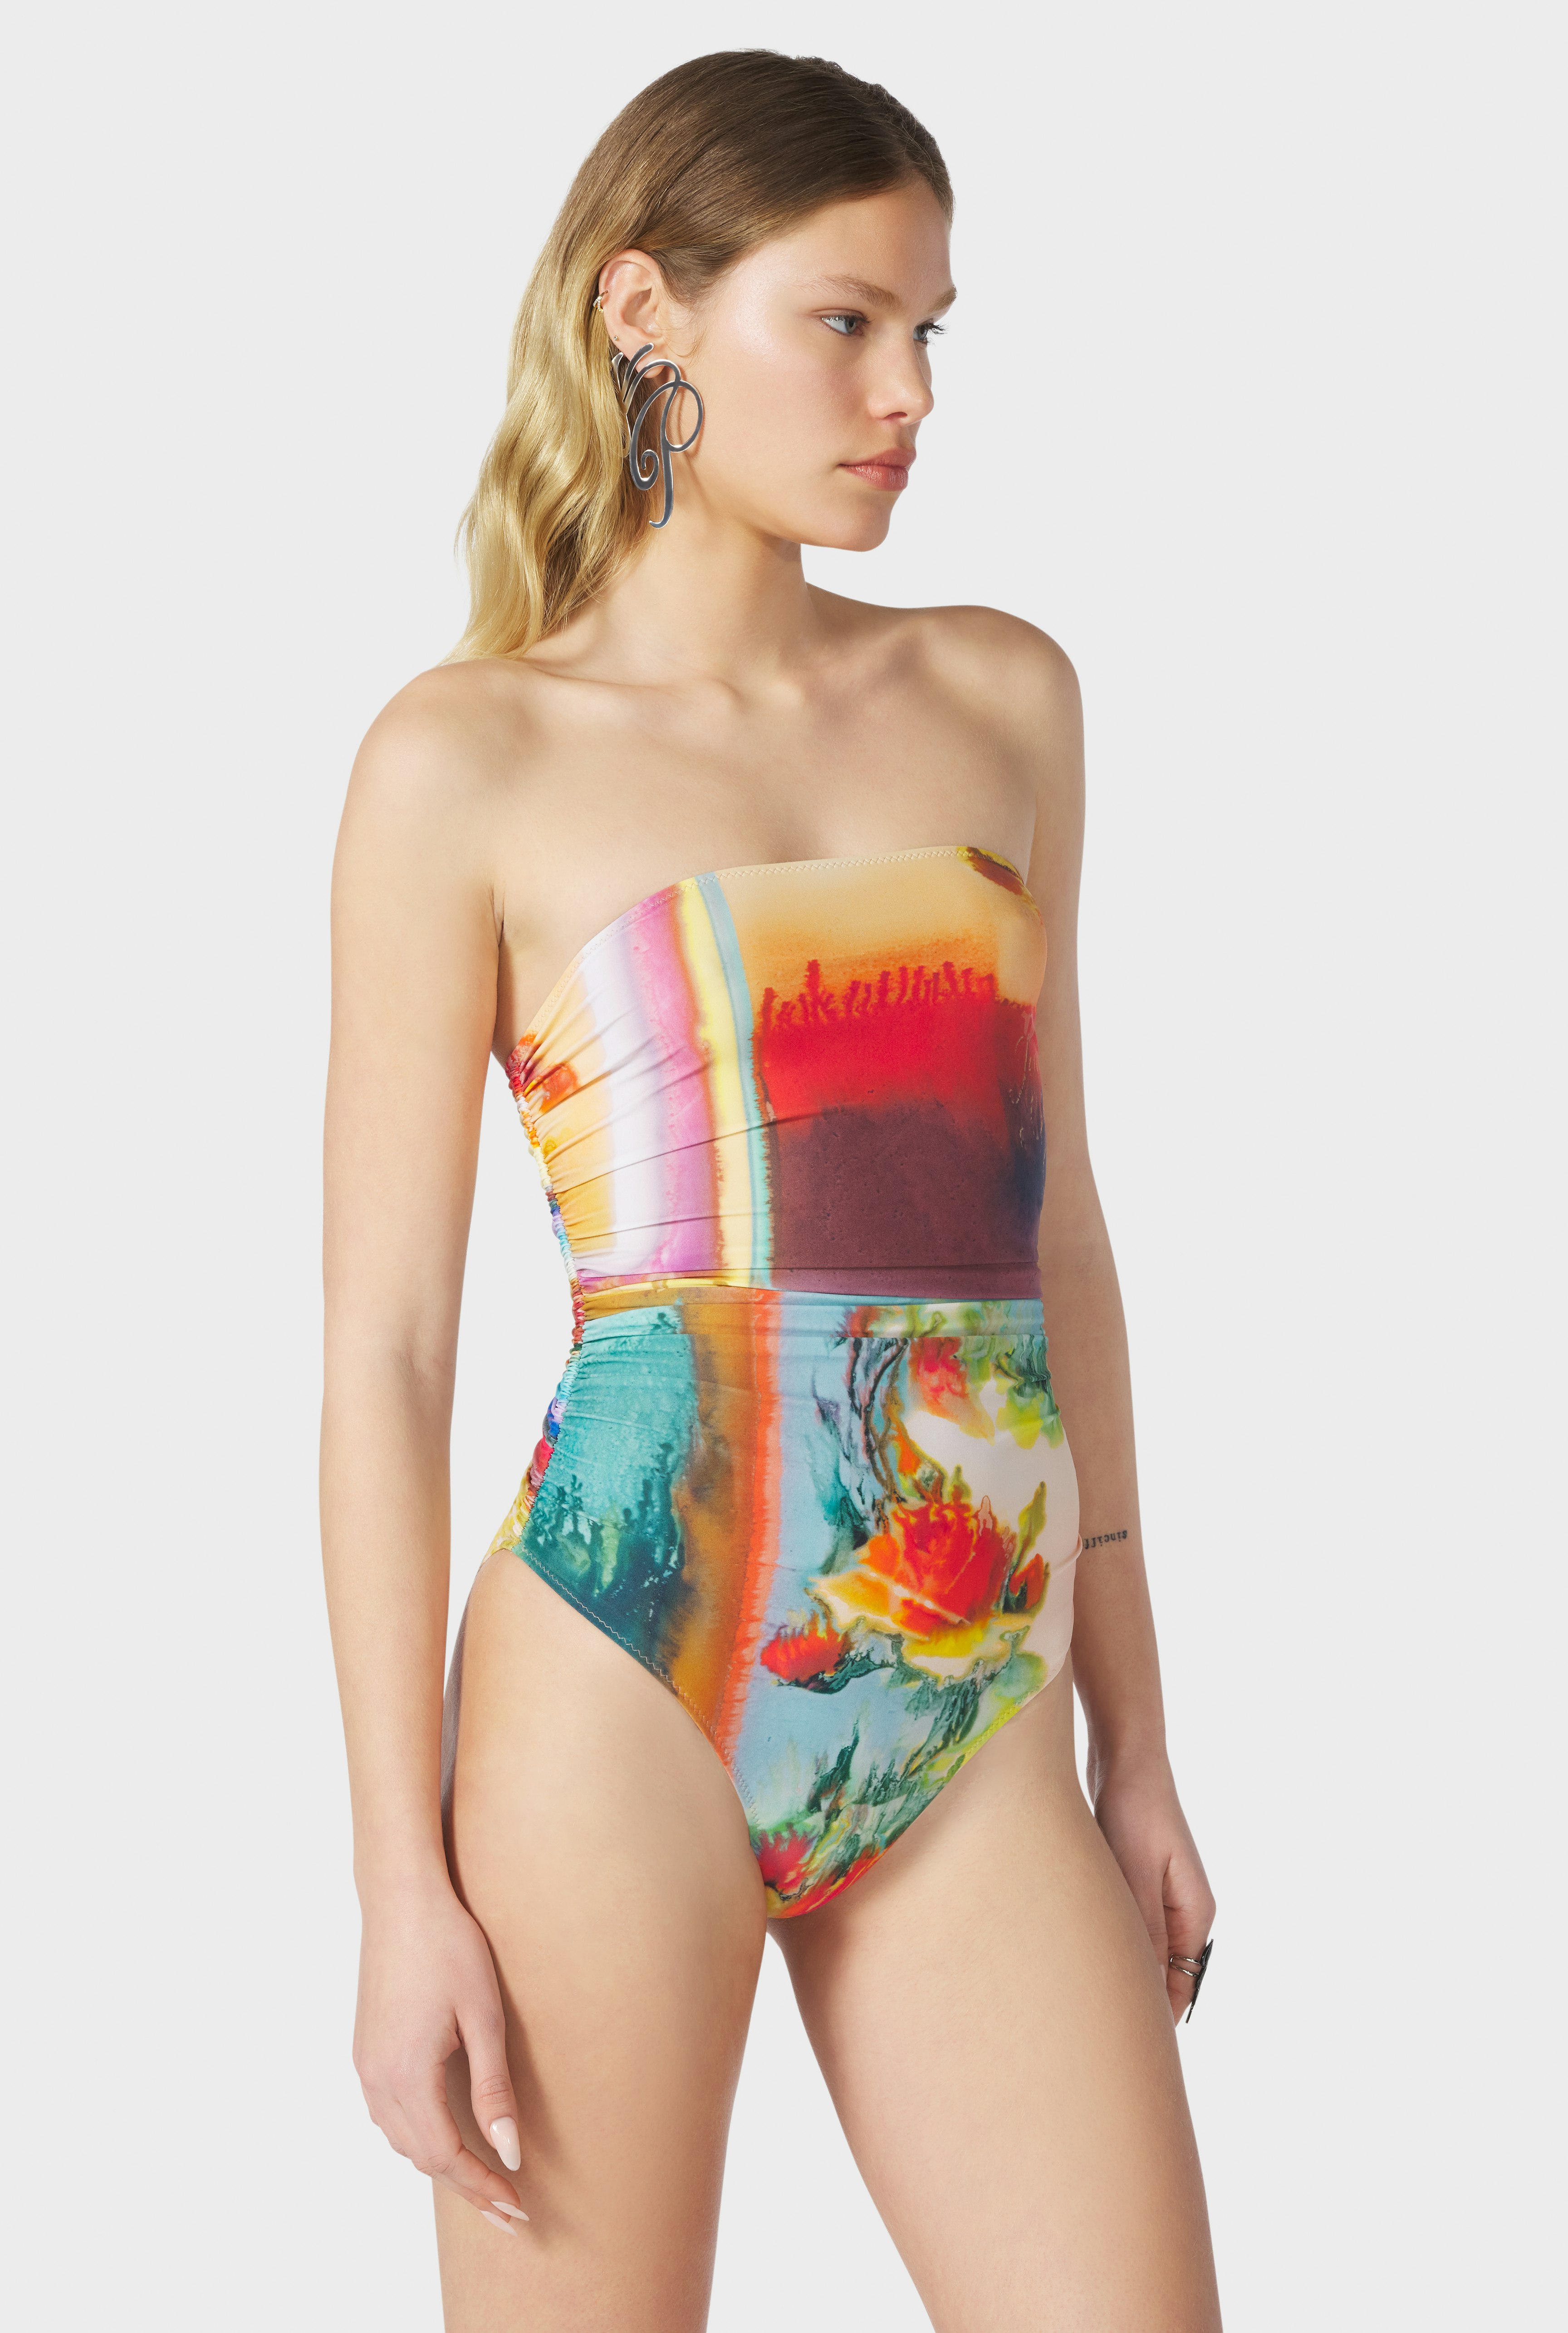 The Scarf Swimsuit hover